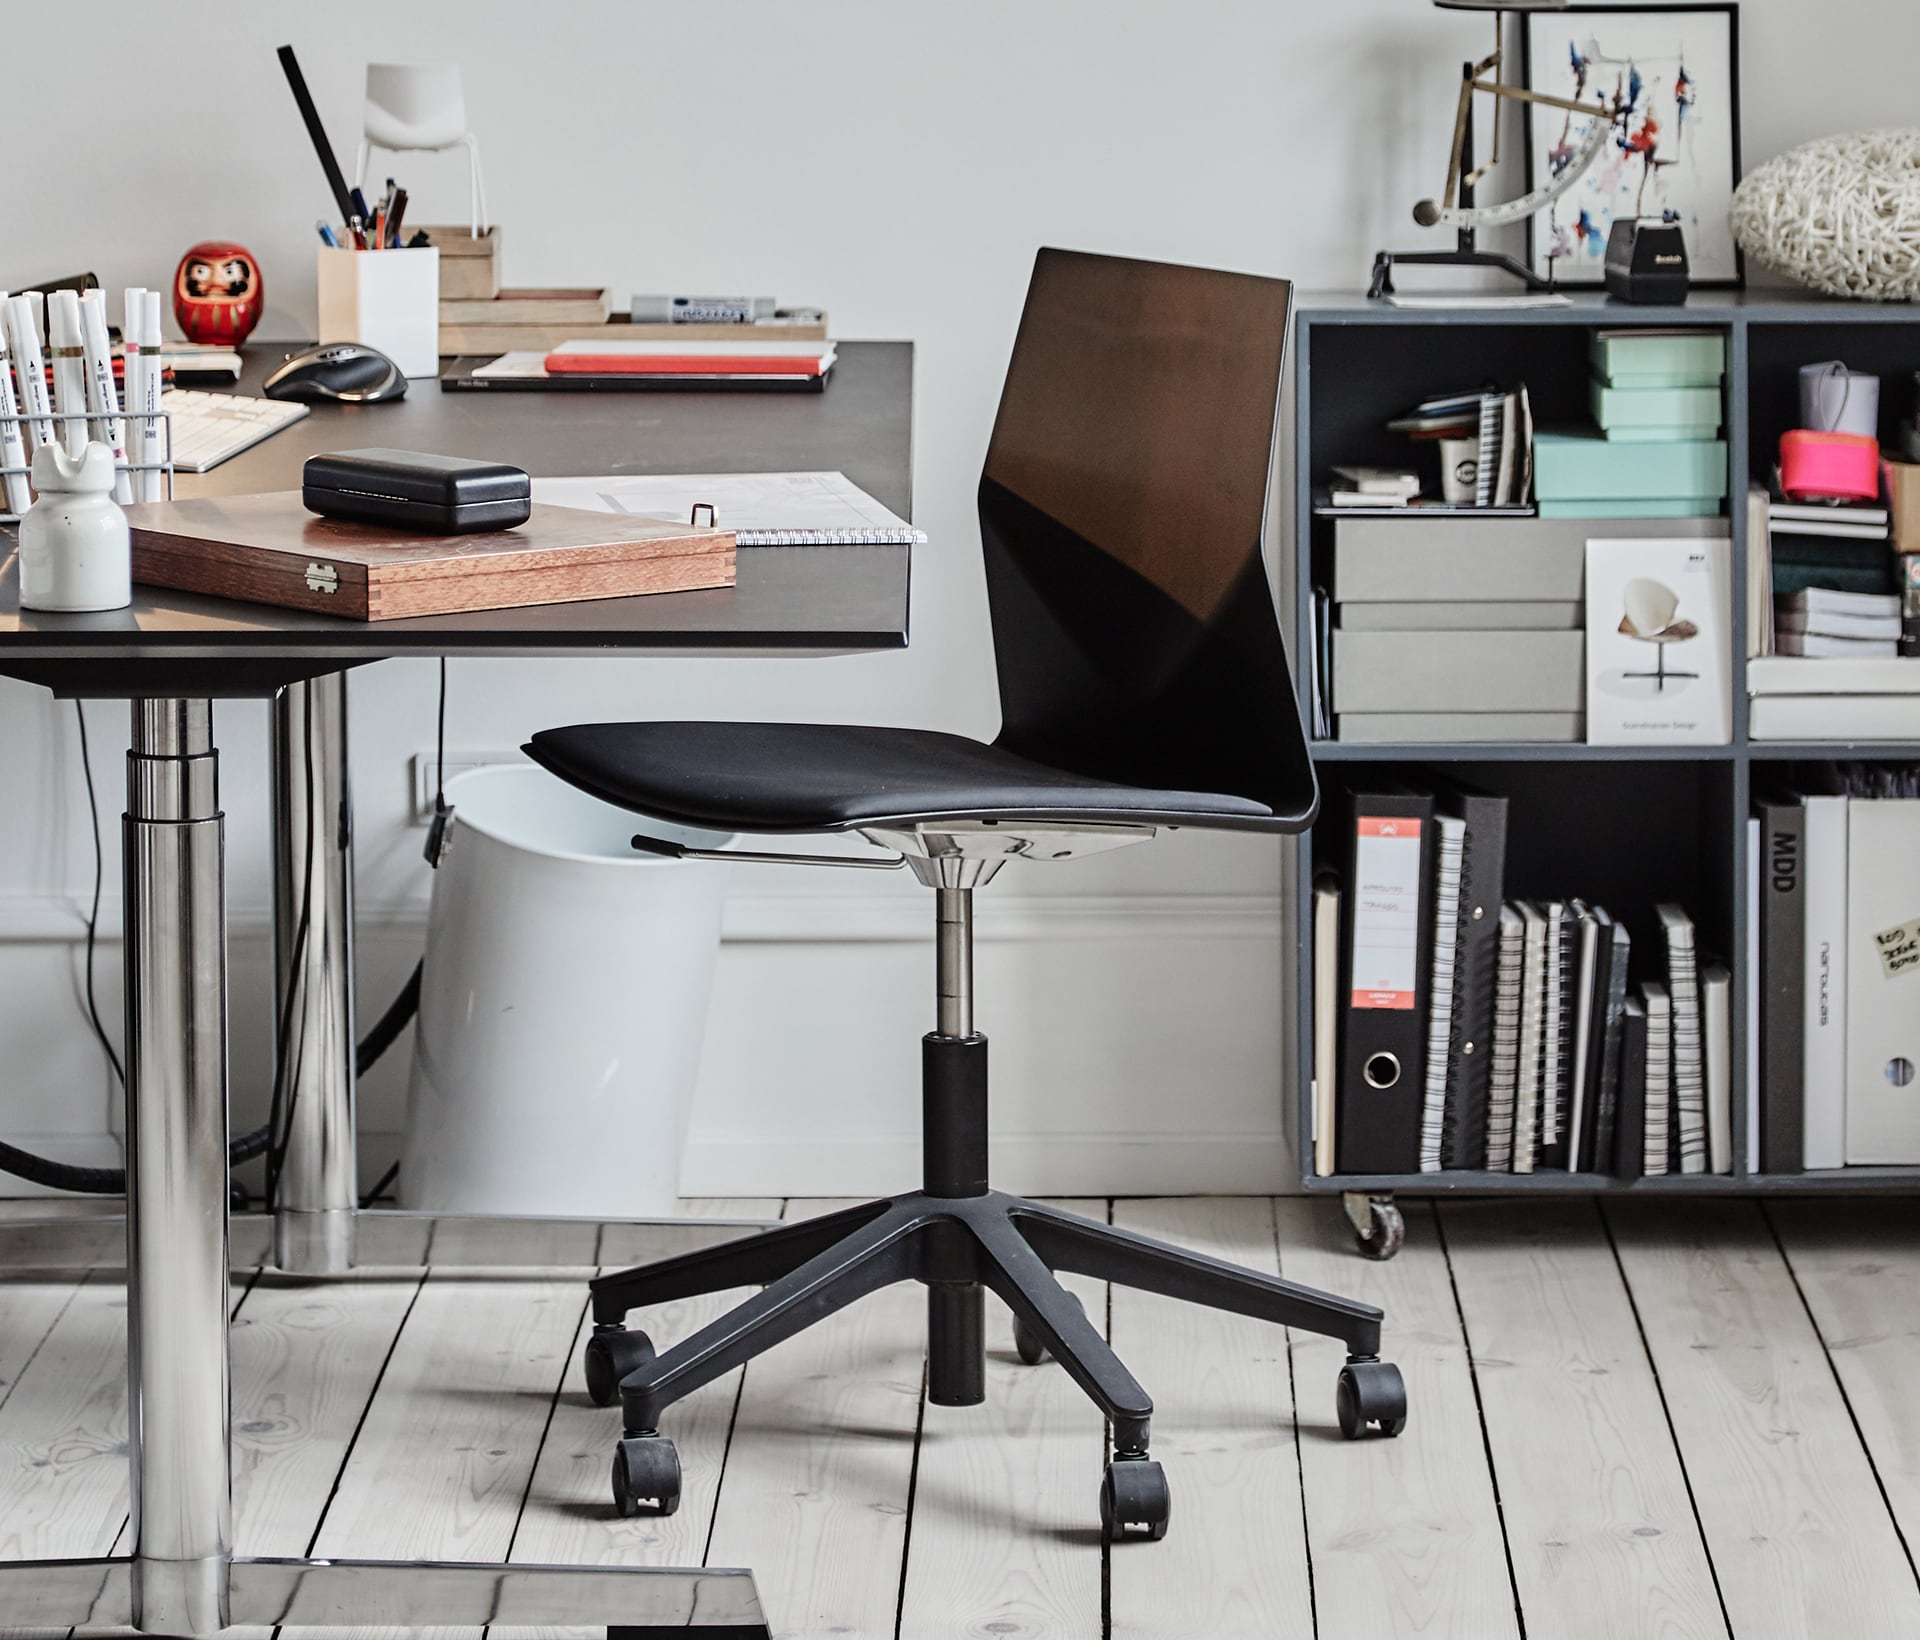 A desk with a black chair and books on it.